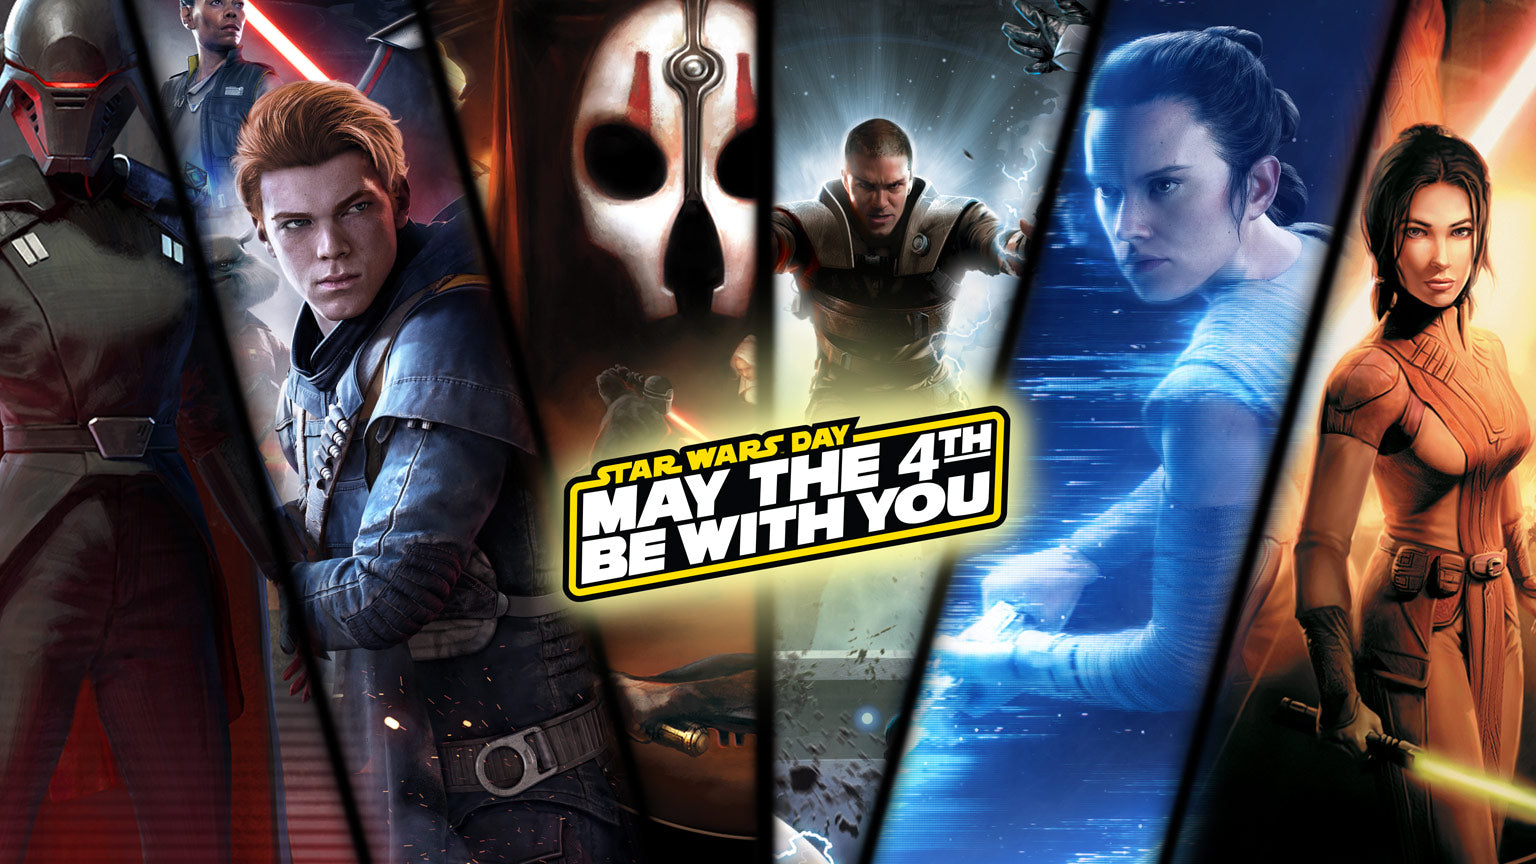 The Best Star Wars Games To Play On May The 4th